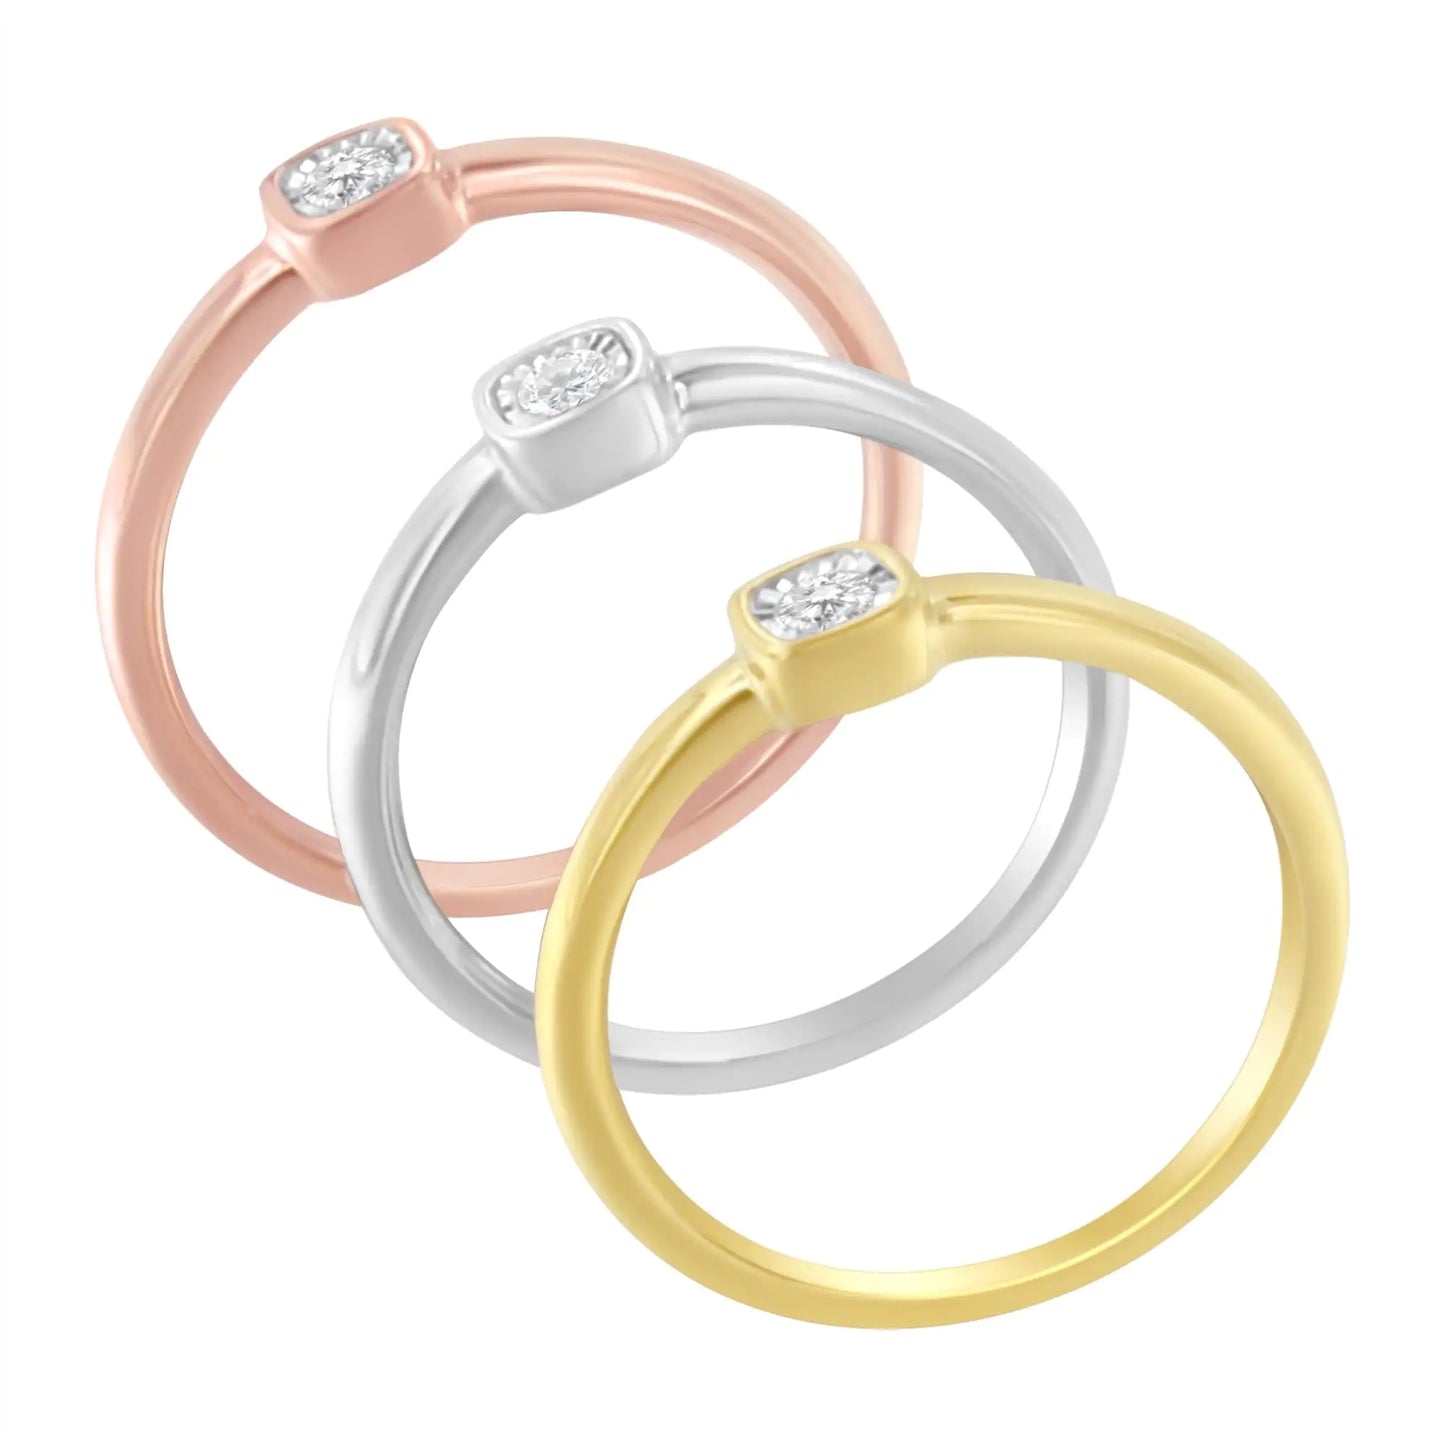 Tri-Color 14K Gold Plated .925 Sterling Silver 1/6 Carat Diamond Square Cushion-Shaped Miracle Set Petite Fashion Promise Ring Set (J-K Color, I1-I2 Clarity)